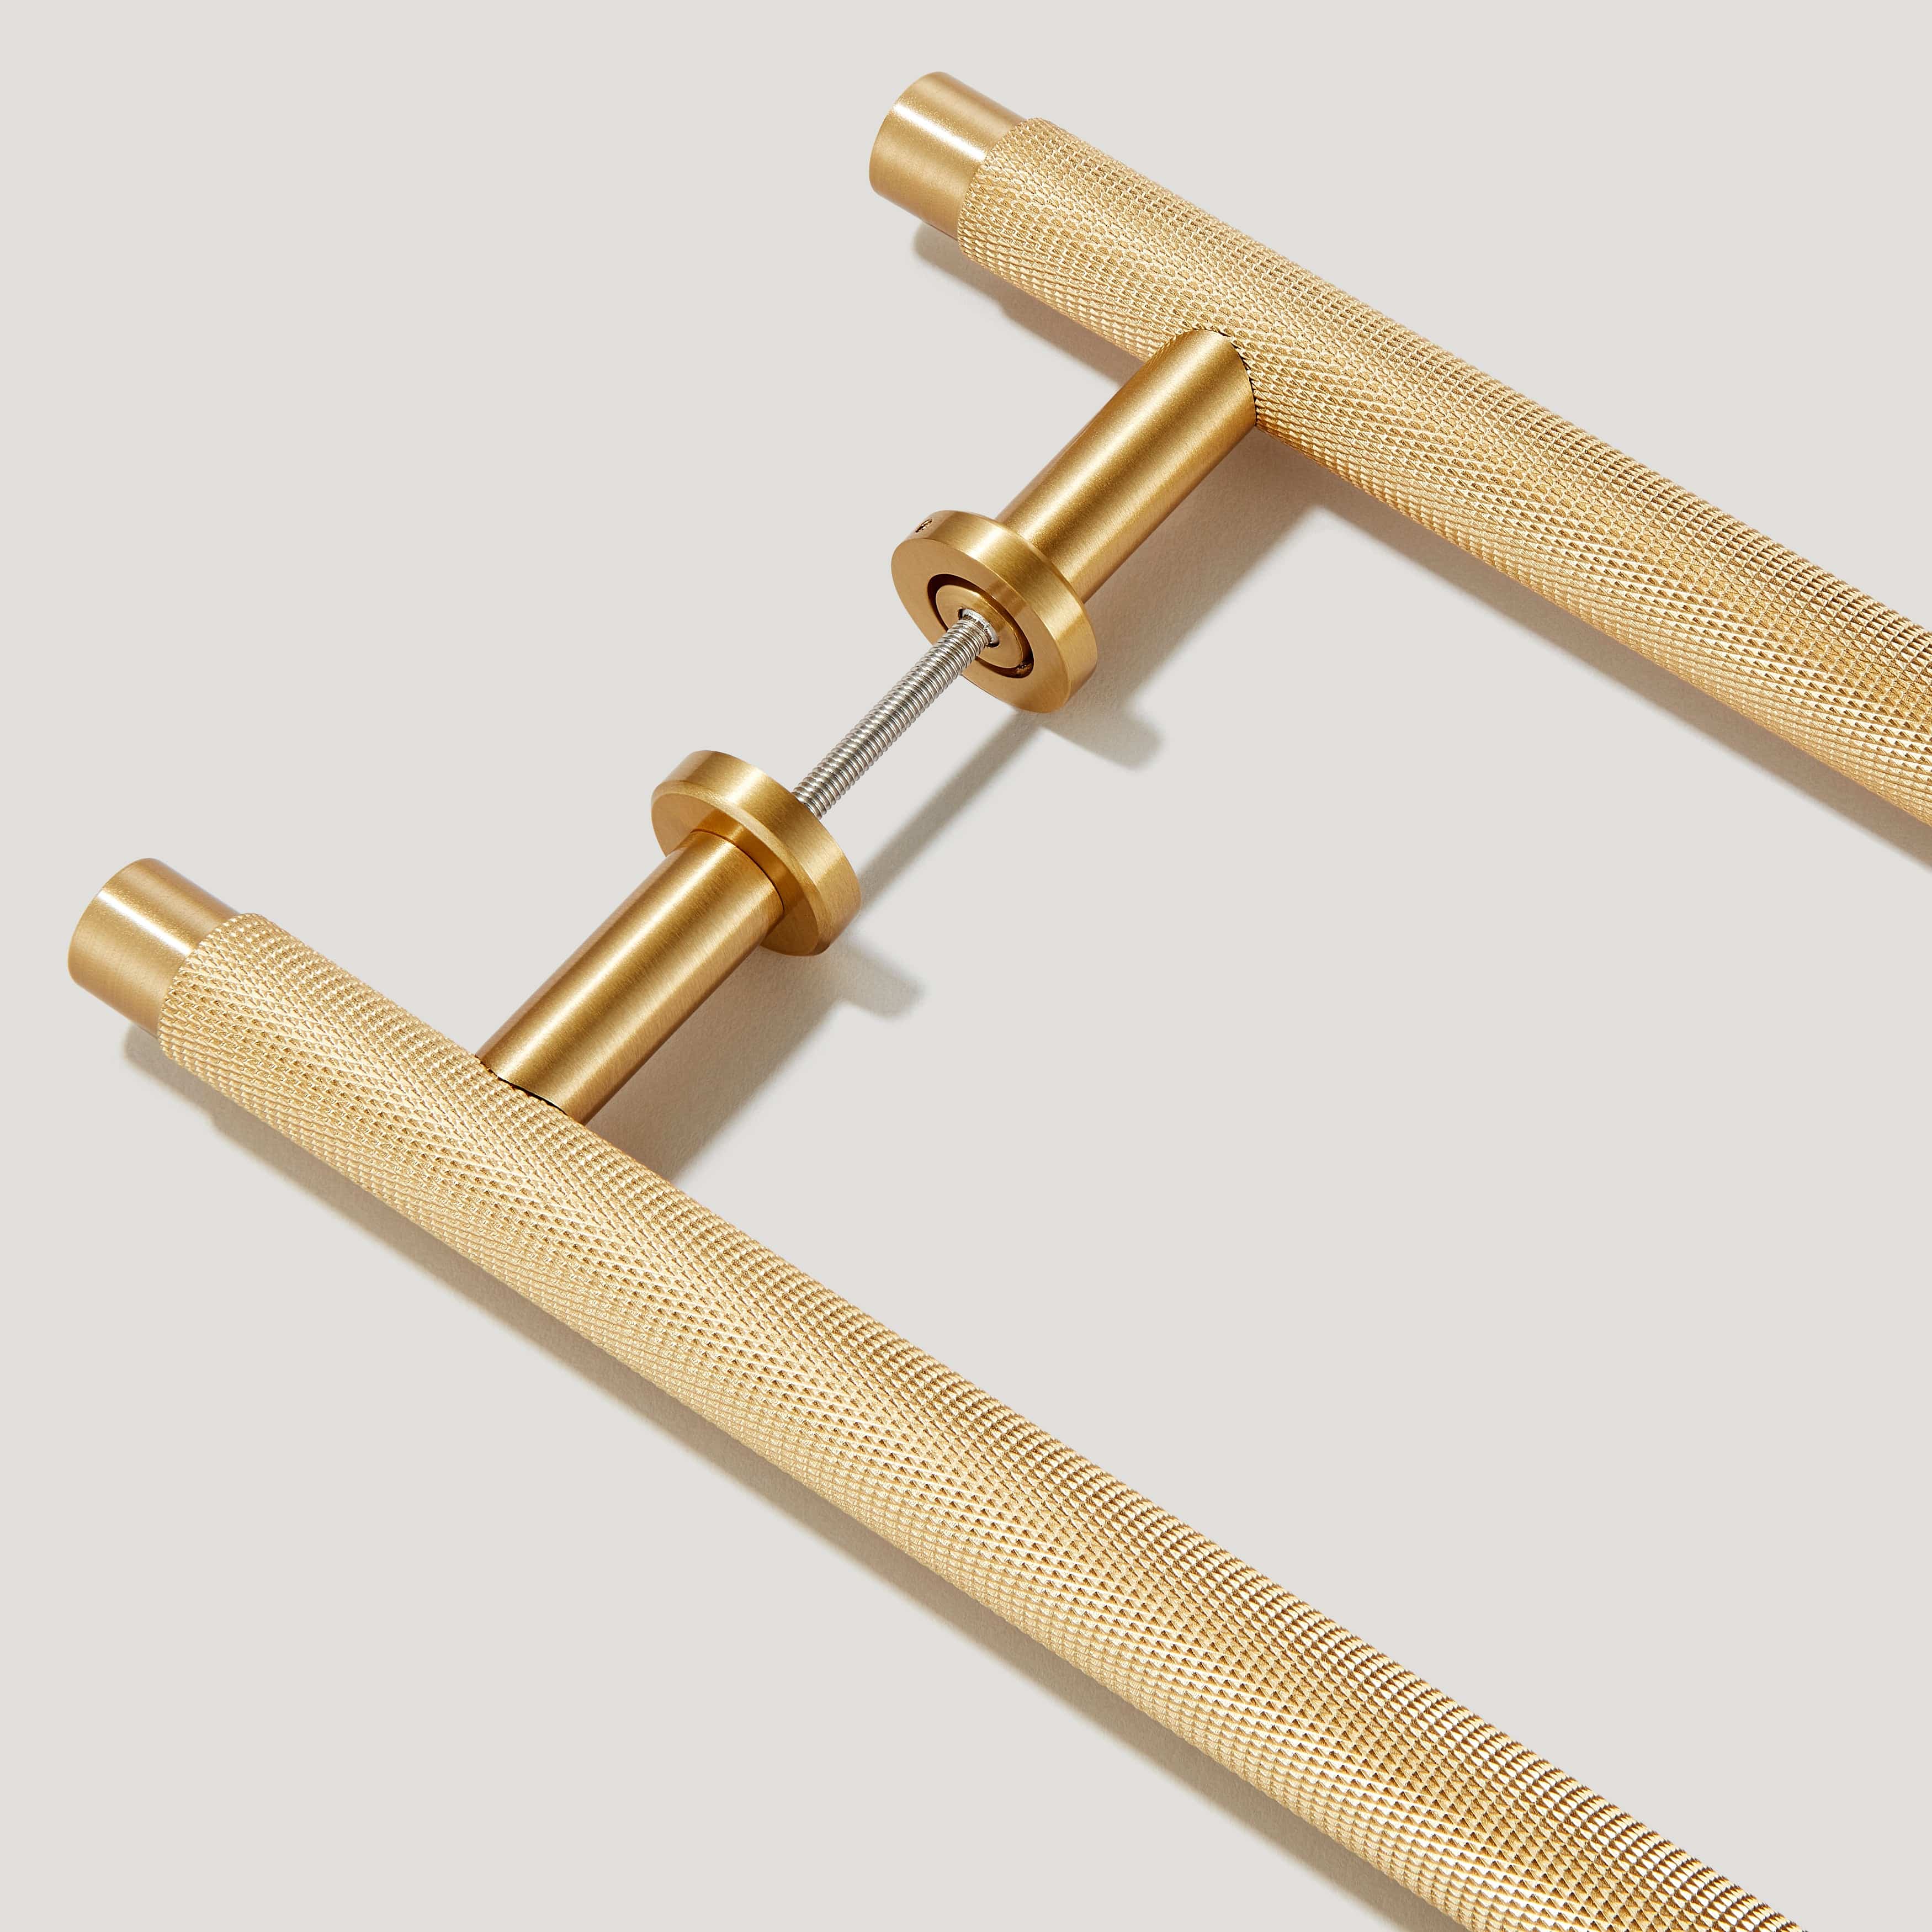 Plank Hardware STURDY Back to Back Pull Fitting - Brass